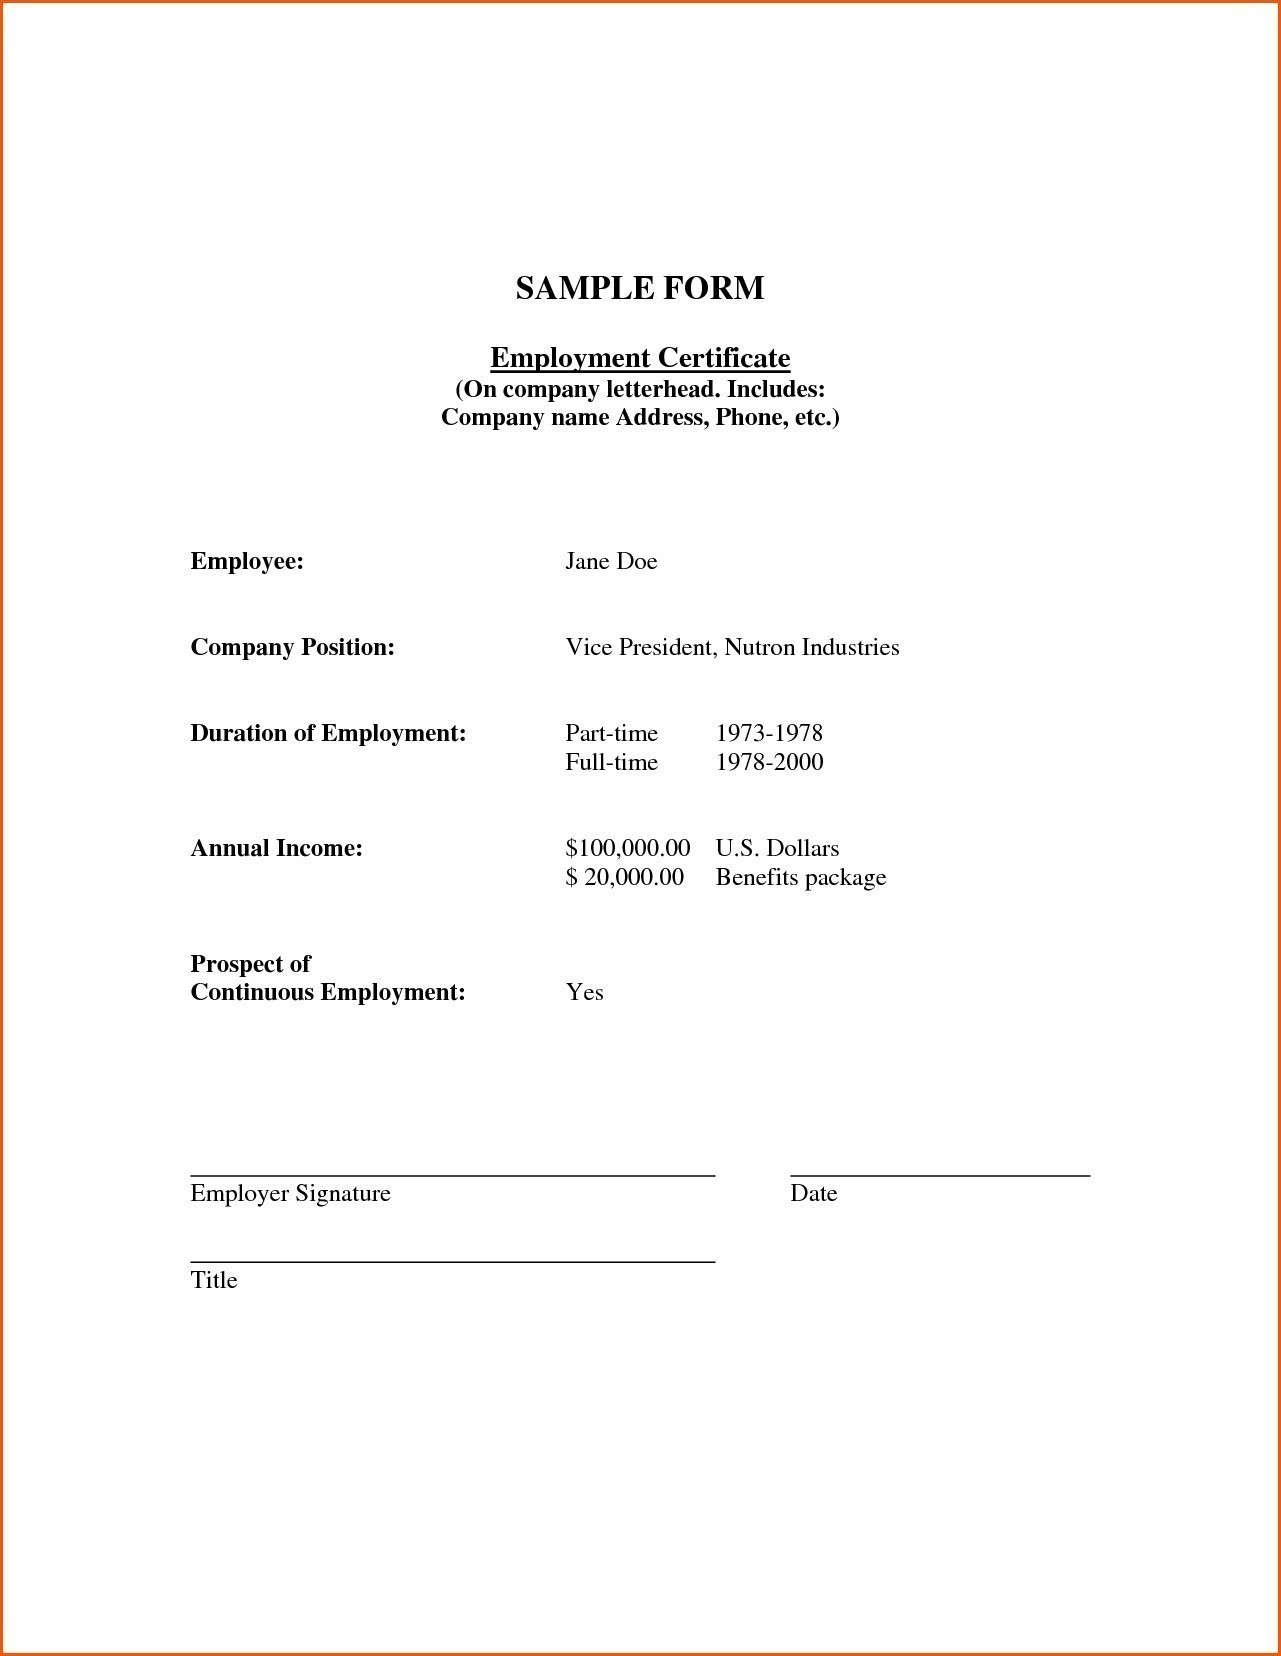 Proof Of Employment and Salary Letter Template - Sample Certificate Employment with Salary Indicated Best